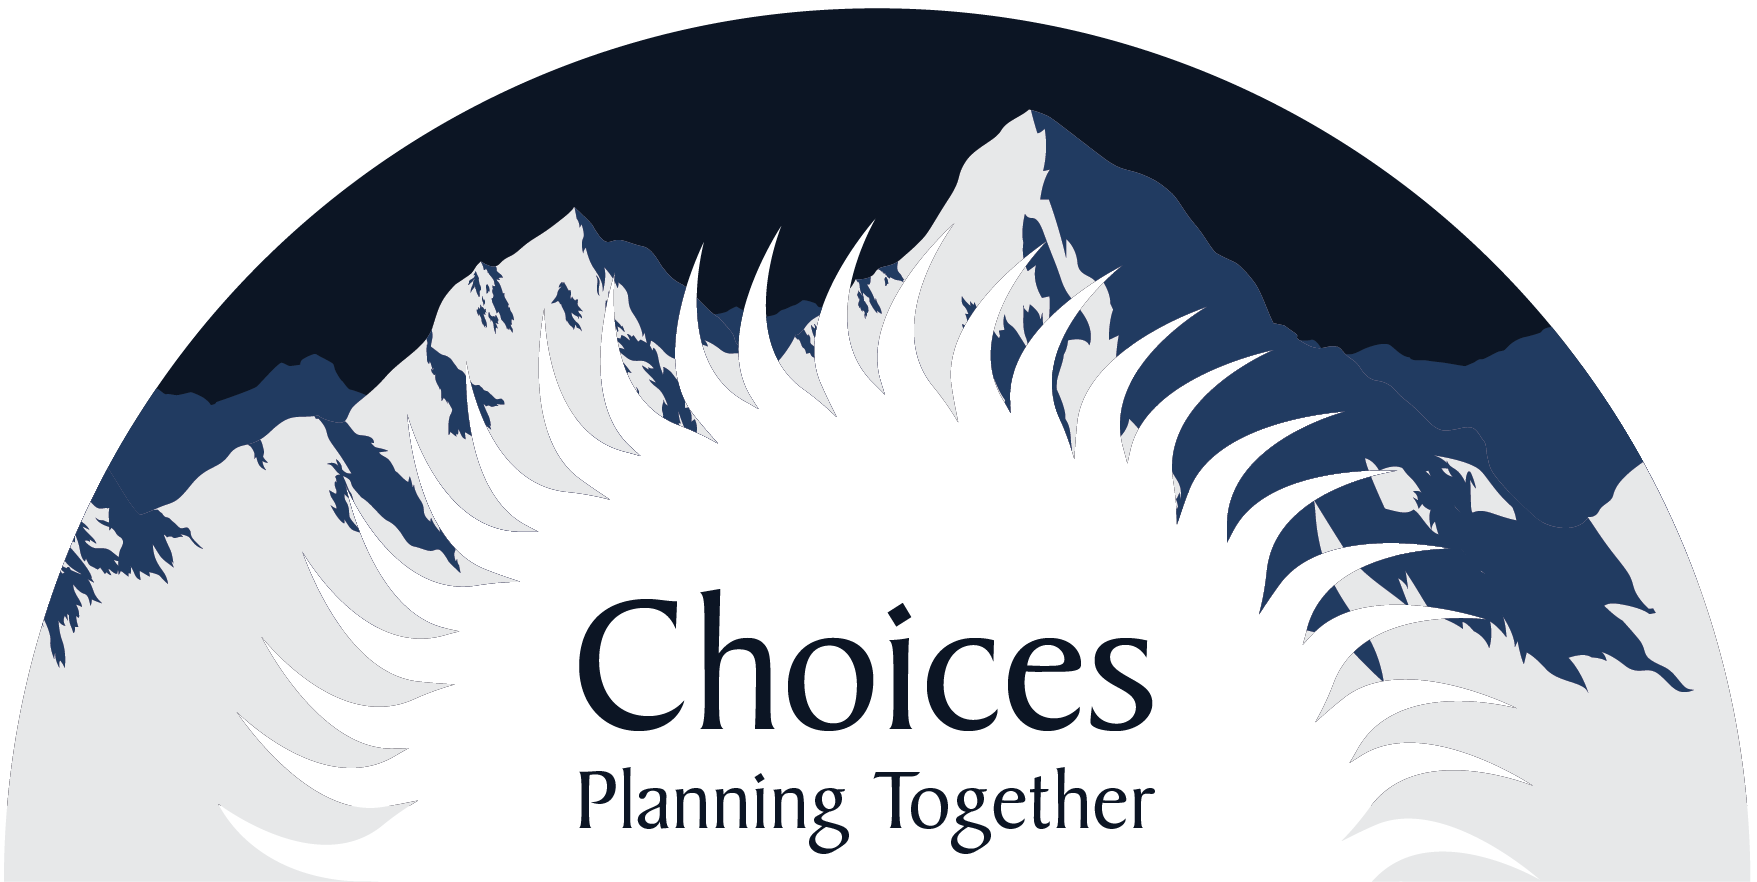 choices-with-text-tight-crop_237